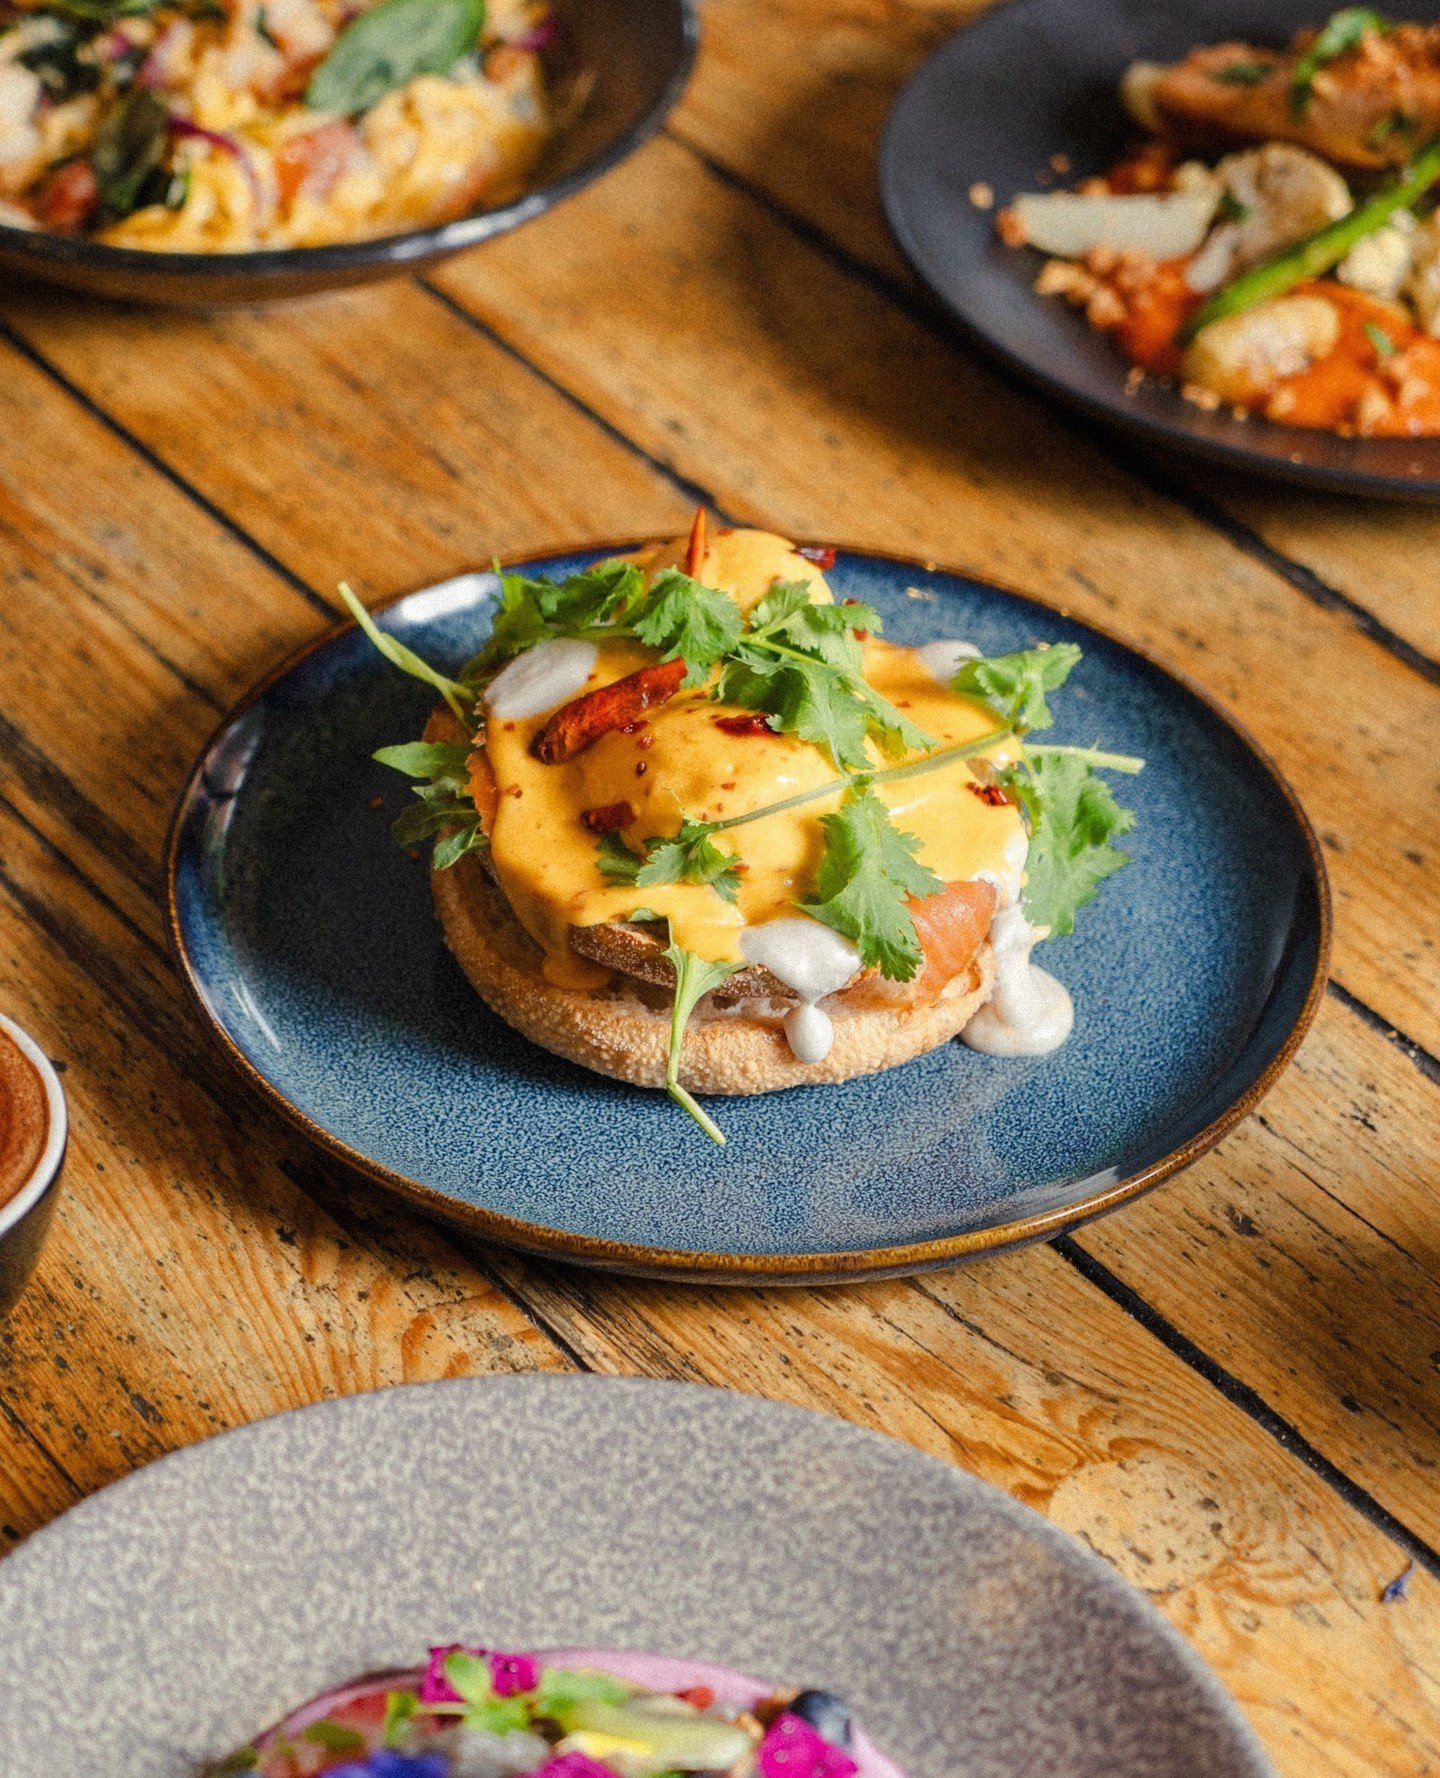 It's the star of the show, Tom Young Benedict! What do you know about it? Smoked salmon, tom yum hollandaise, poached eggs, roquette, chilli, on sourdough.⁠
⁠
If you try anything from us, it has to be this one.